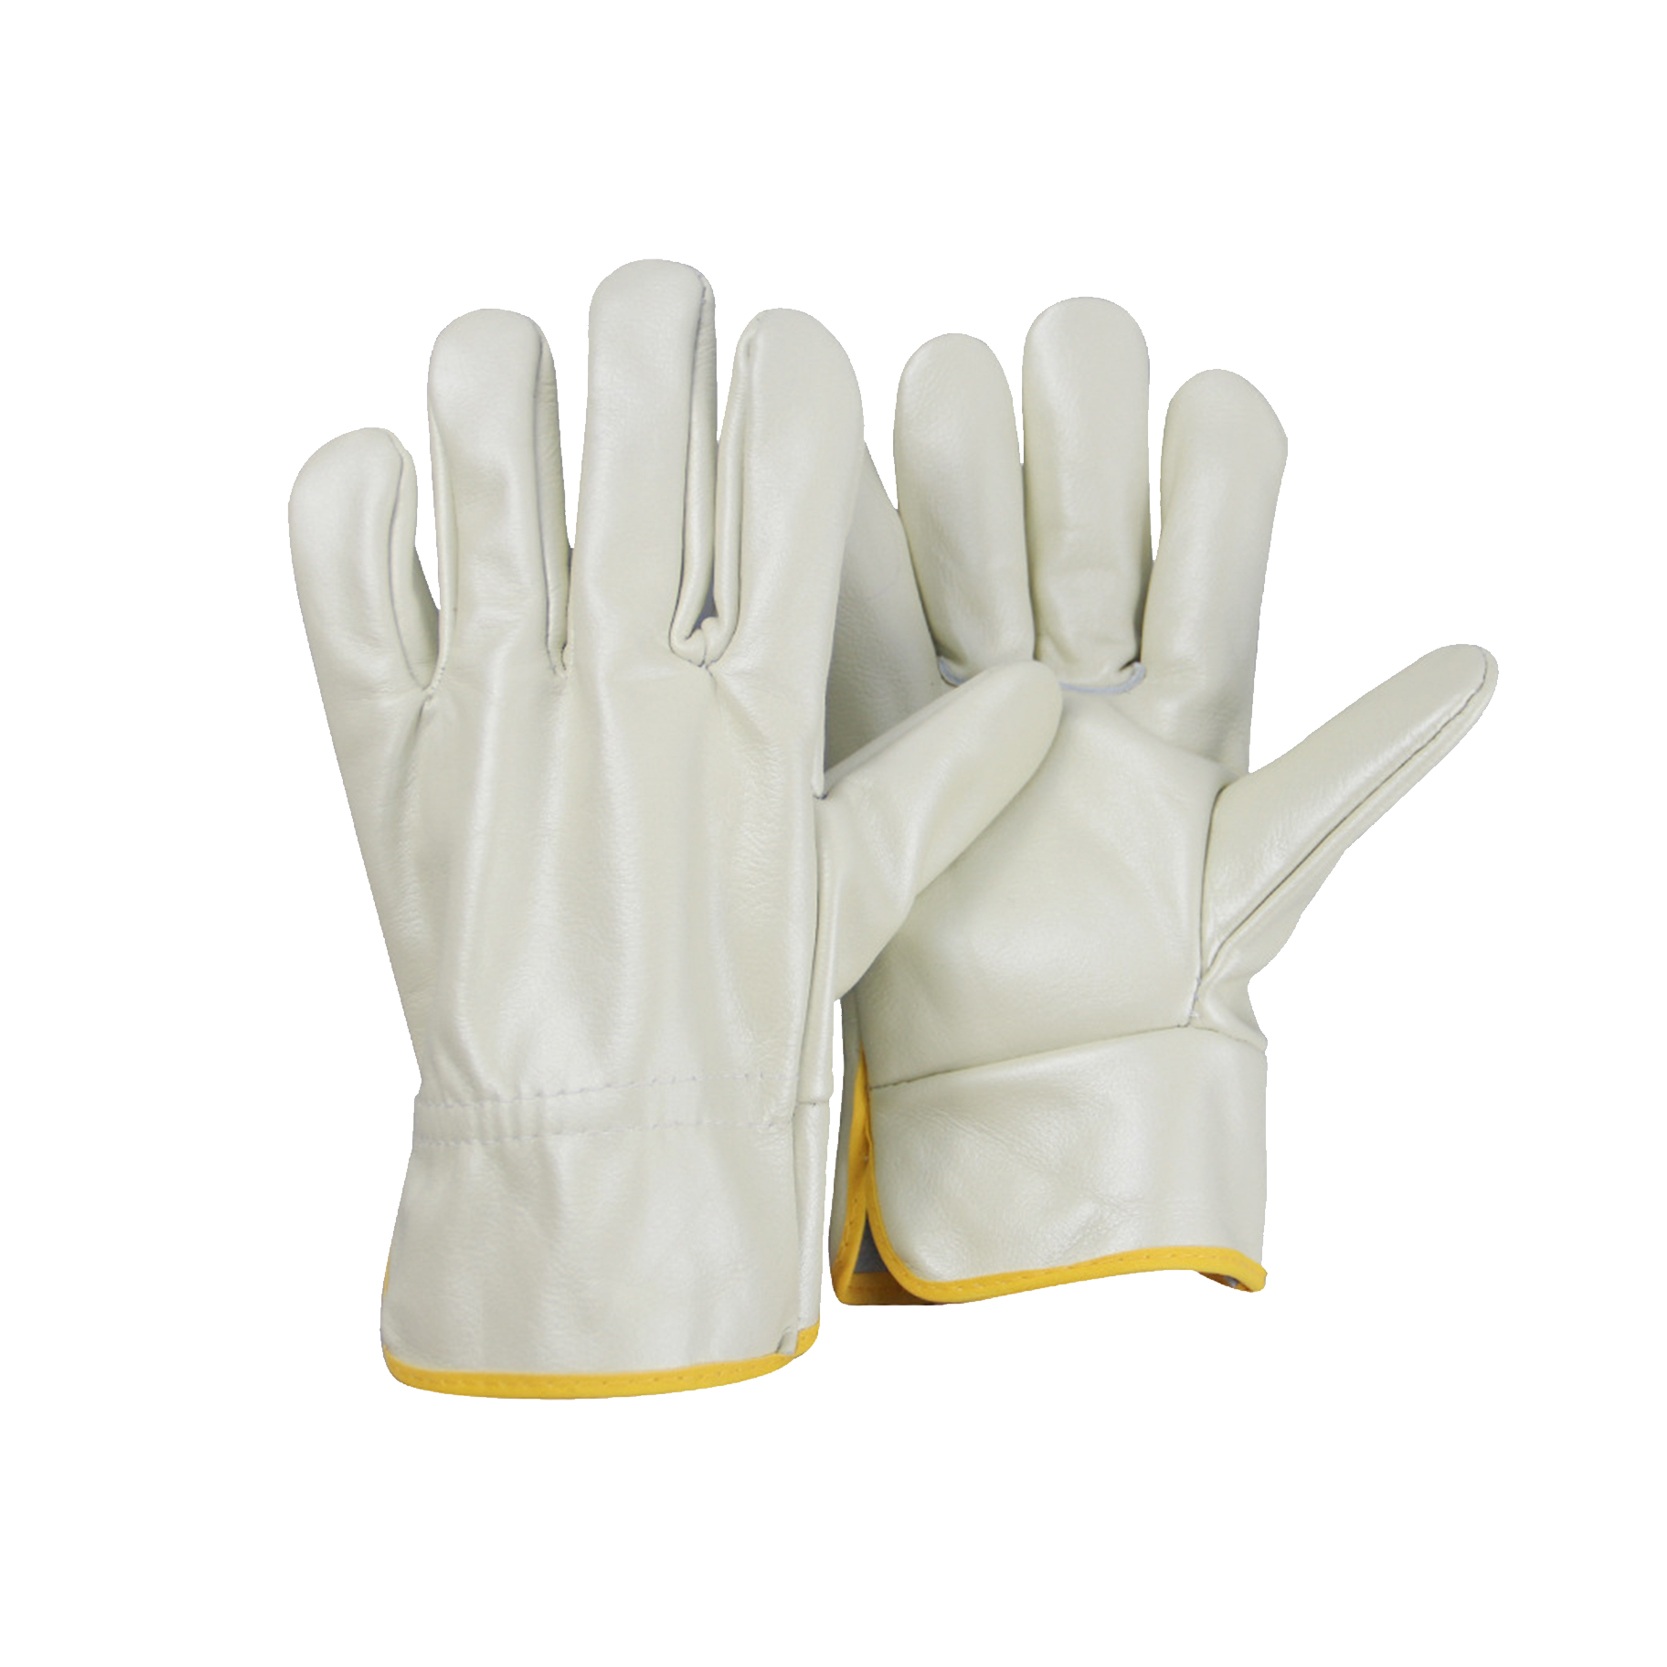 High Quality Cow Leather Water Proof Working Safety Labor Driver Gloves